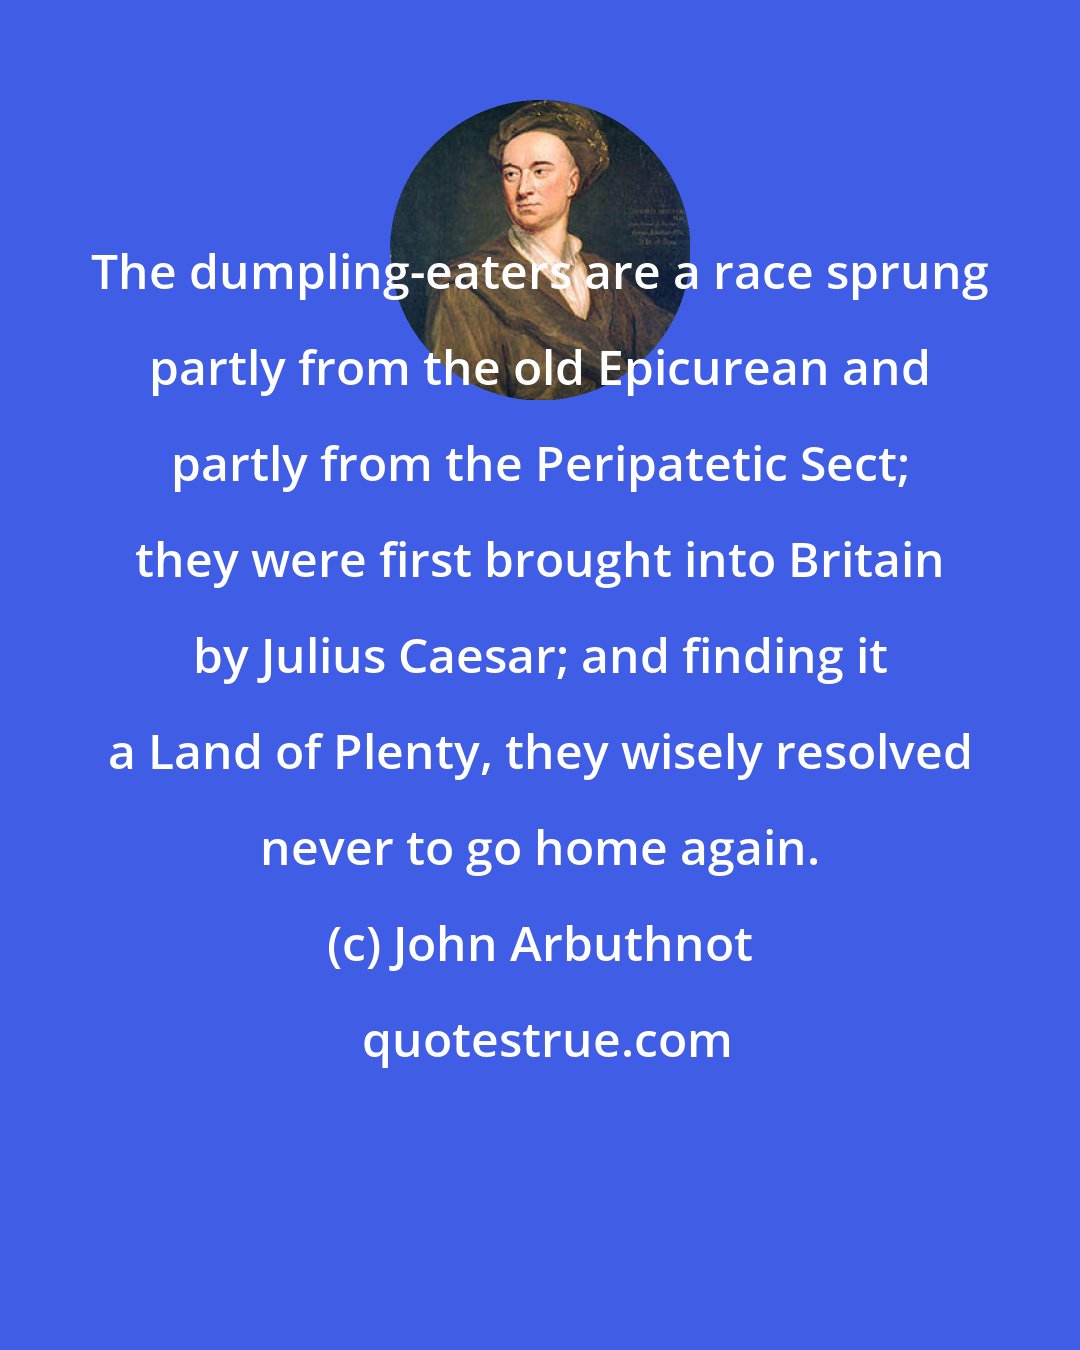 John Arbuthnot: The dumpling-eaters are a race sprung partly from the old Epicurean and partly from the Peripatetic Sect; they were first brought into Britain by Julius Caesar; and finding it a Land of Plenty, they wisely resolved never to go home again.